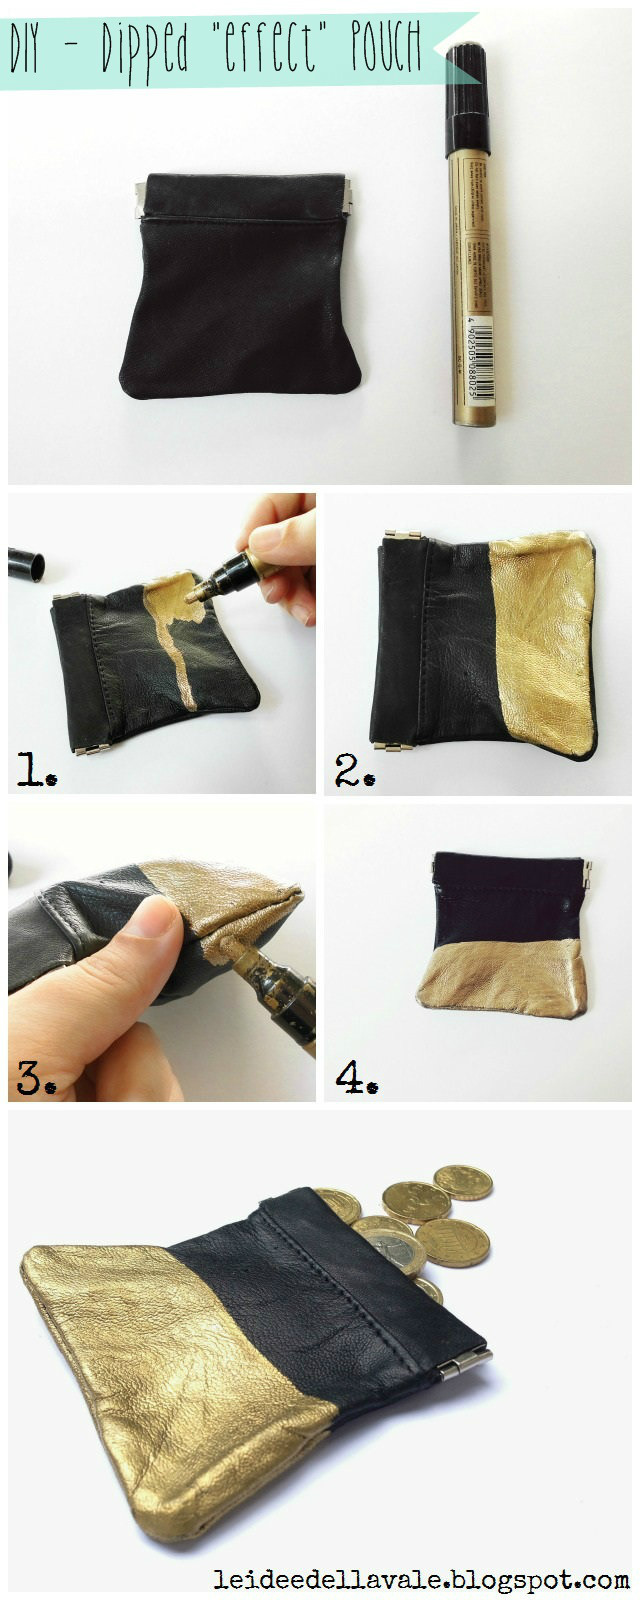 Dipped effect pouch Foto Tutorial